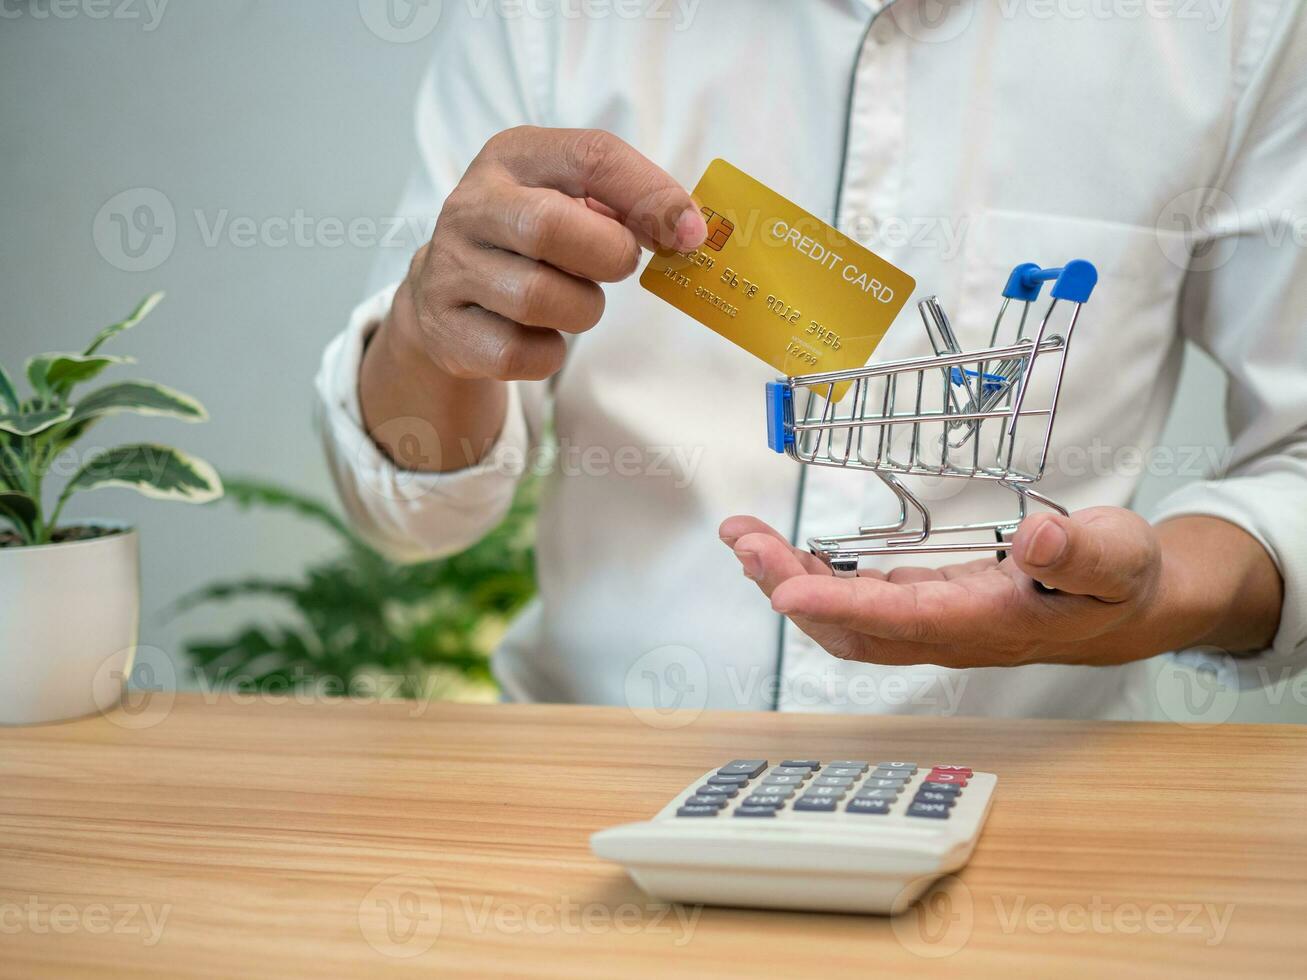 Man holding a credit card and pressing a calculator. Shopping concept. Cashless payment concept. photo